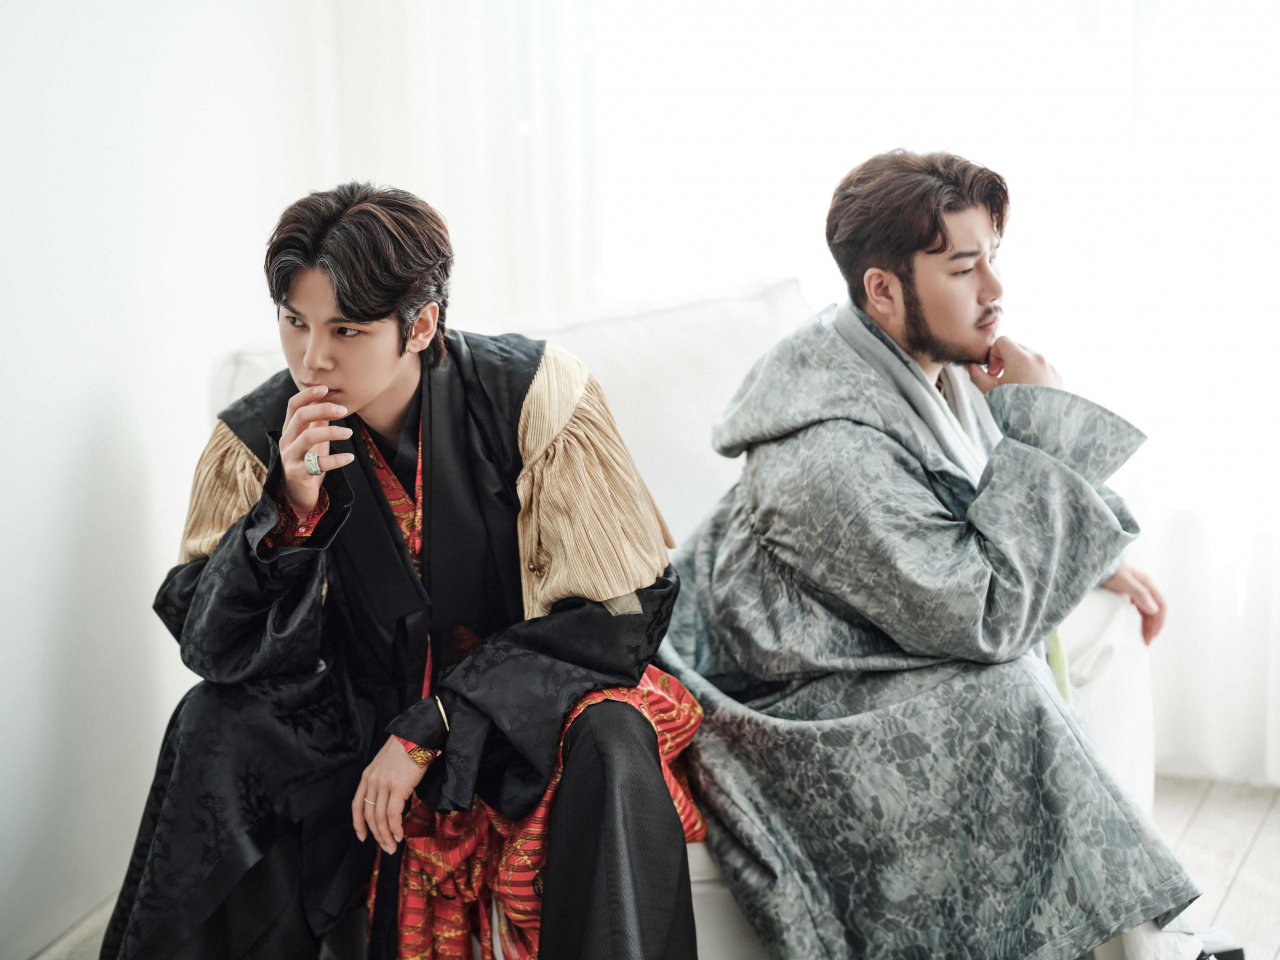 Top pansori singers Kim Jun-su (left) and Yu Taepyeongyang will portray Shylock and Antonio, respectively, for a 